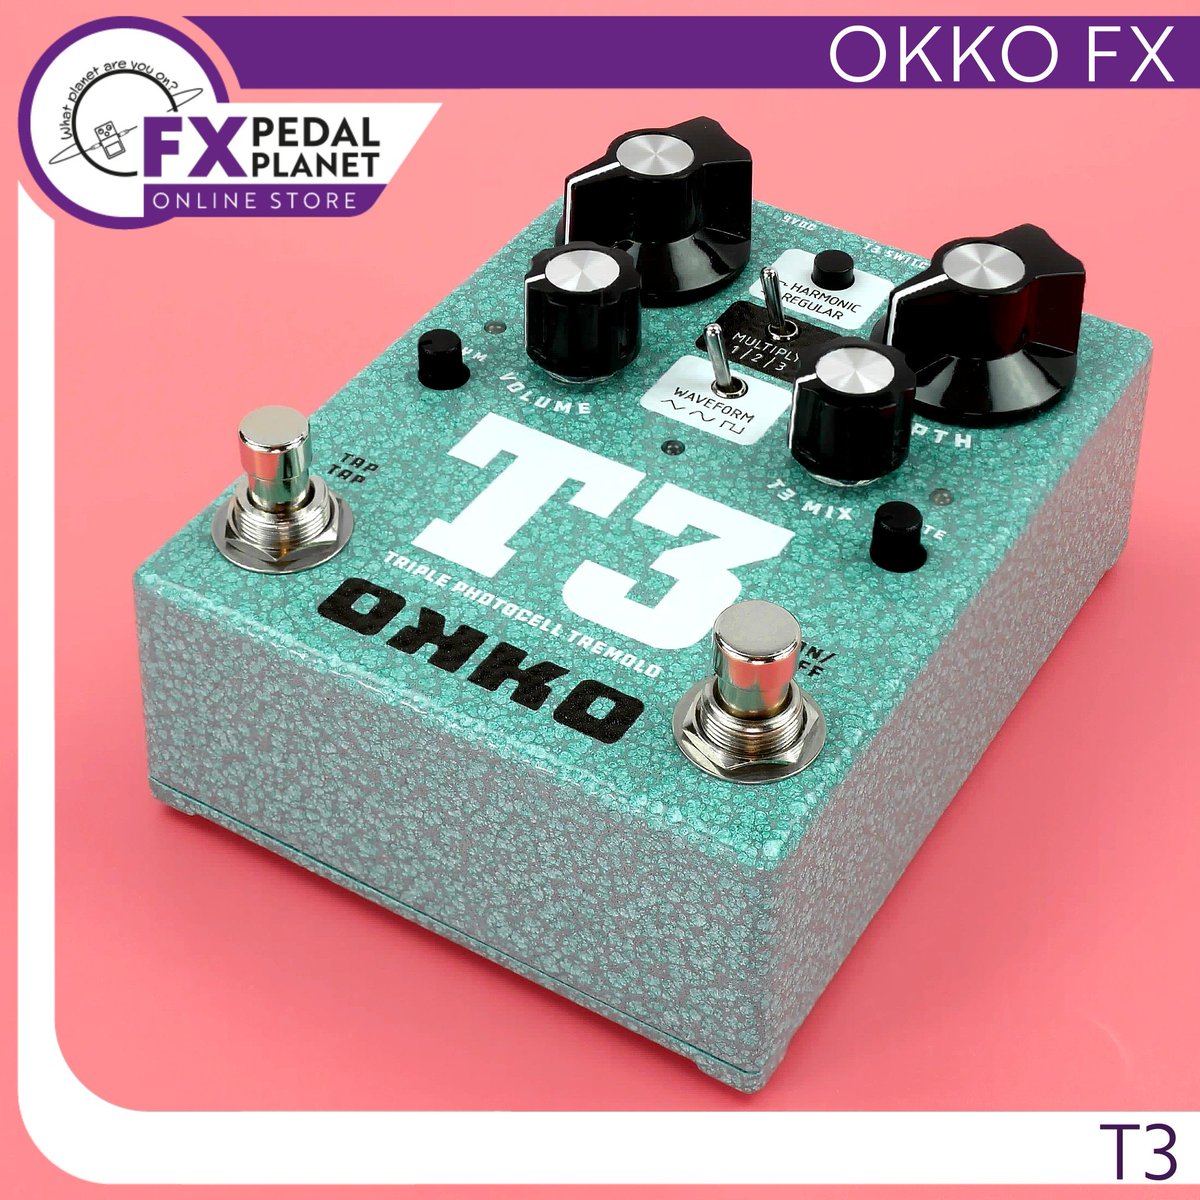 The OKKO FX T3 stands out as a meticulously crafted tremolo pedal, boasting a rich array of features that deliver exceptional sound quality and remarkable versatility.

#FXPedalPlanetOnlineStore #okkofx #t3 #tremolo #harmonictremolo #effectspedal 
#GuitarEffects #VersatilePedals